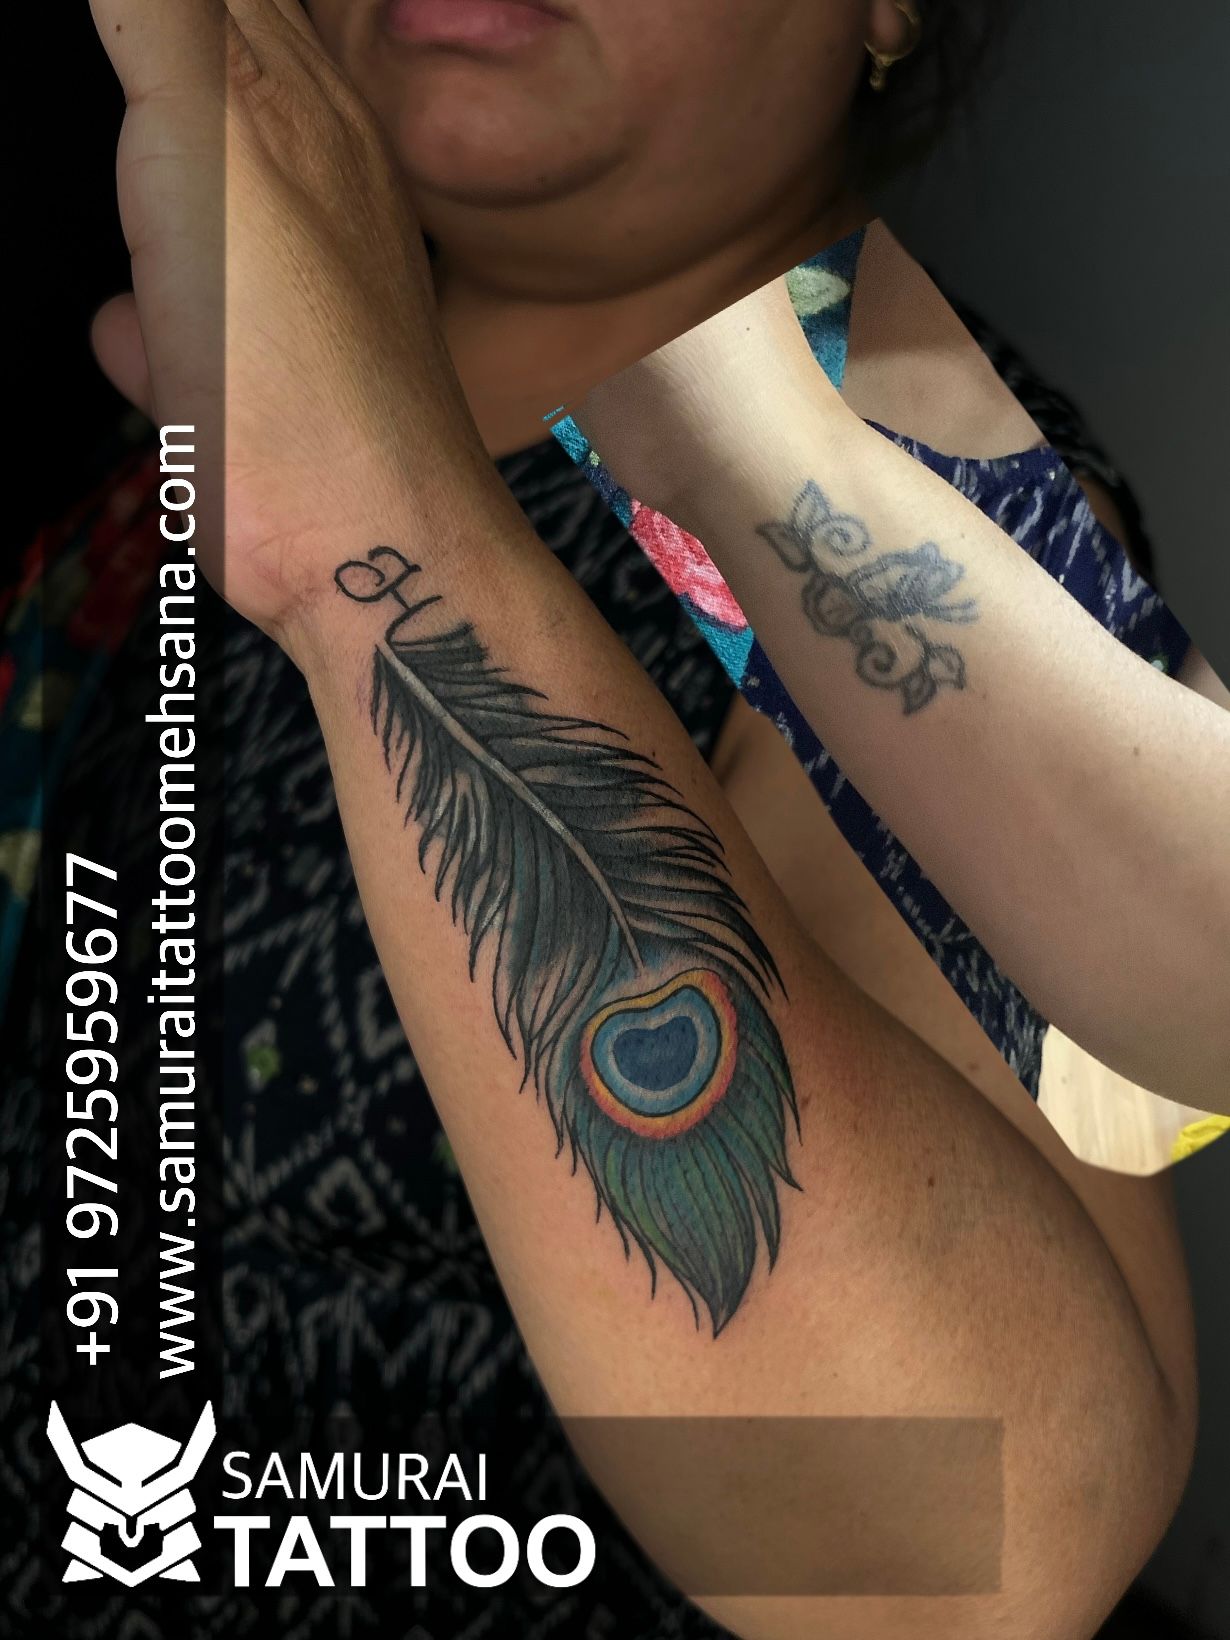 Tattoo uploaded by Vipul Chaudhary • Cover up tattoo